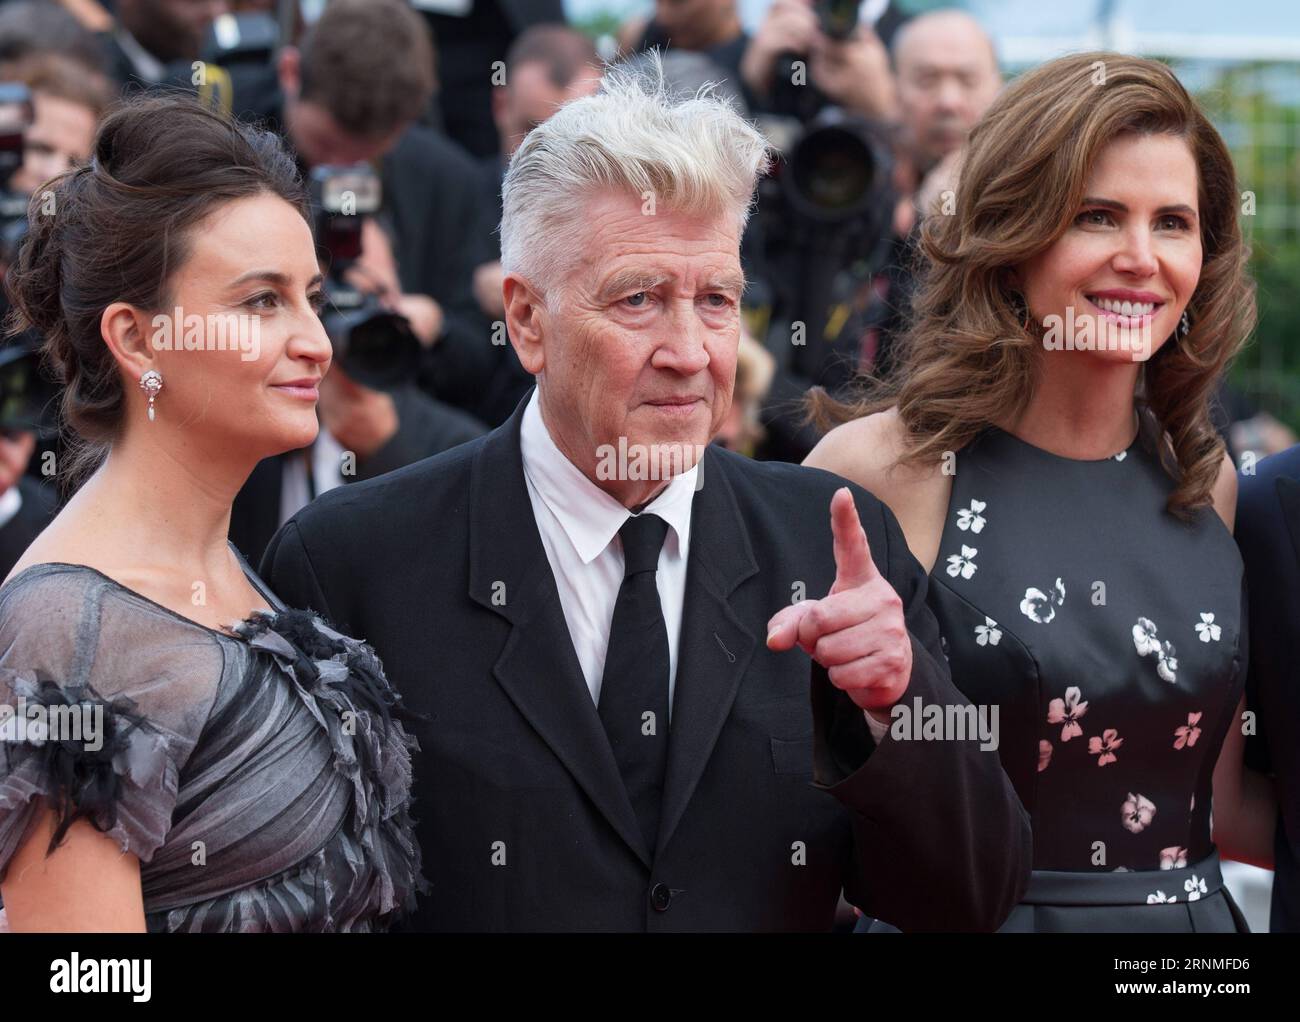 (170526) -- CANNES, May 26, 2017 -- US director David Lynch (C), his wife Emily Stofle (L) and producer Desiree Gruber pose on the red carpet for the screening of the new episodes of Twin Peak during the 70th annual Cannes Film Festival at Palais des Festivals in Cannes, France, on May 25, 2017. ) (yy) FRANCE-CANNES-DAVID LYNCH-TWIN PEAK-SCREENING xuxjinquan PUBLICATIONxNOTxINxCHN   Cannes May 26 2017 U.S. Director David Lynch C His wife Emily Stofle l and Producer Desiree Gruber Pose ON The Red Carpet for The Screening of The New Episodes of Twin Peak during The 70th Annual Cannes Film Festiv Stock Photo